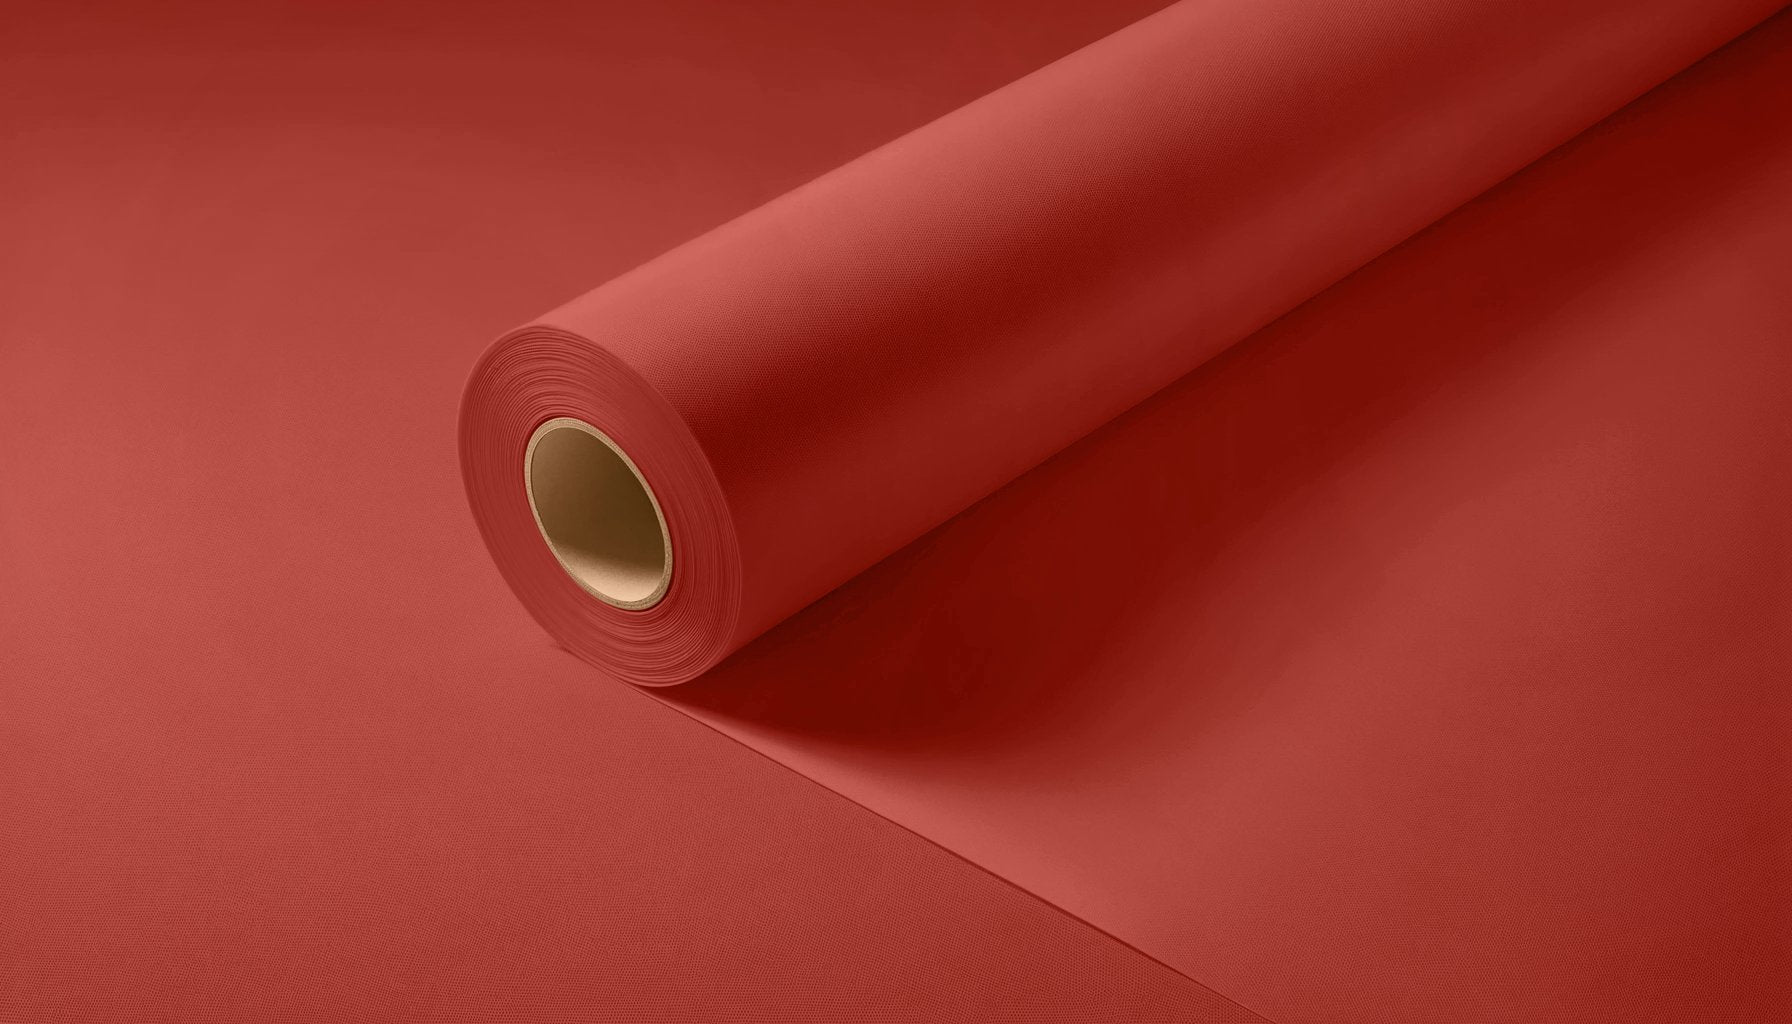 Peel & Stick Removable Re-usable Paint - Color RAL 3013 Tomato Red - offRAL™ - RALRAW LLC, USA